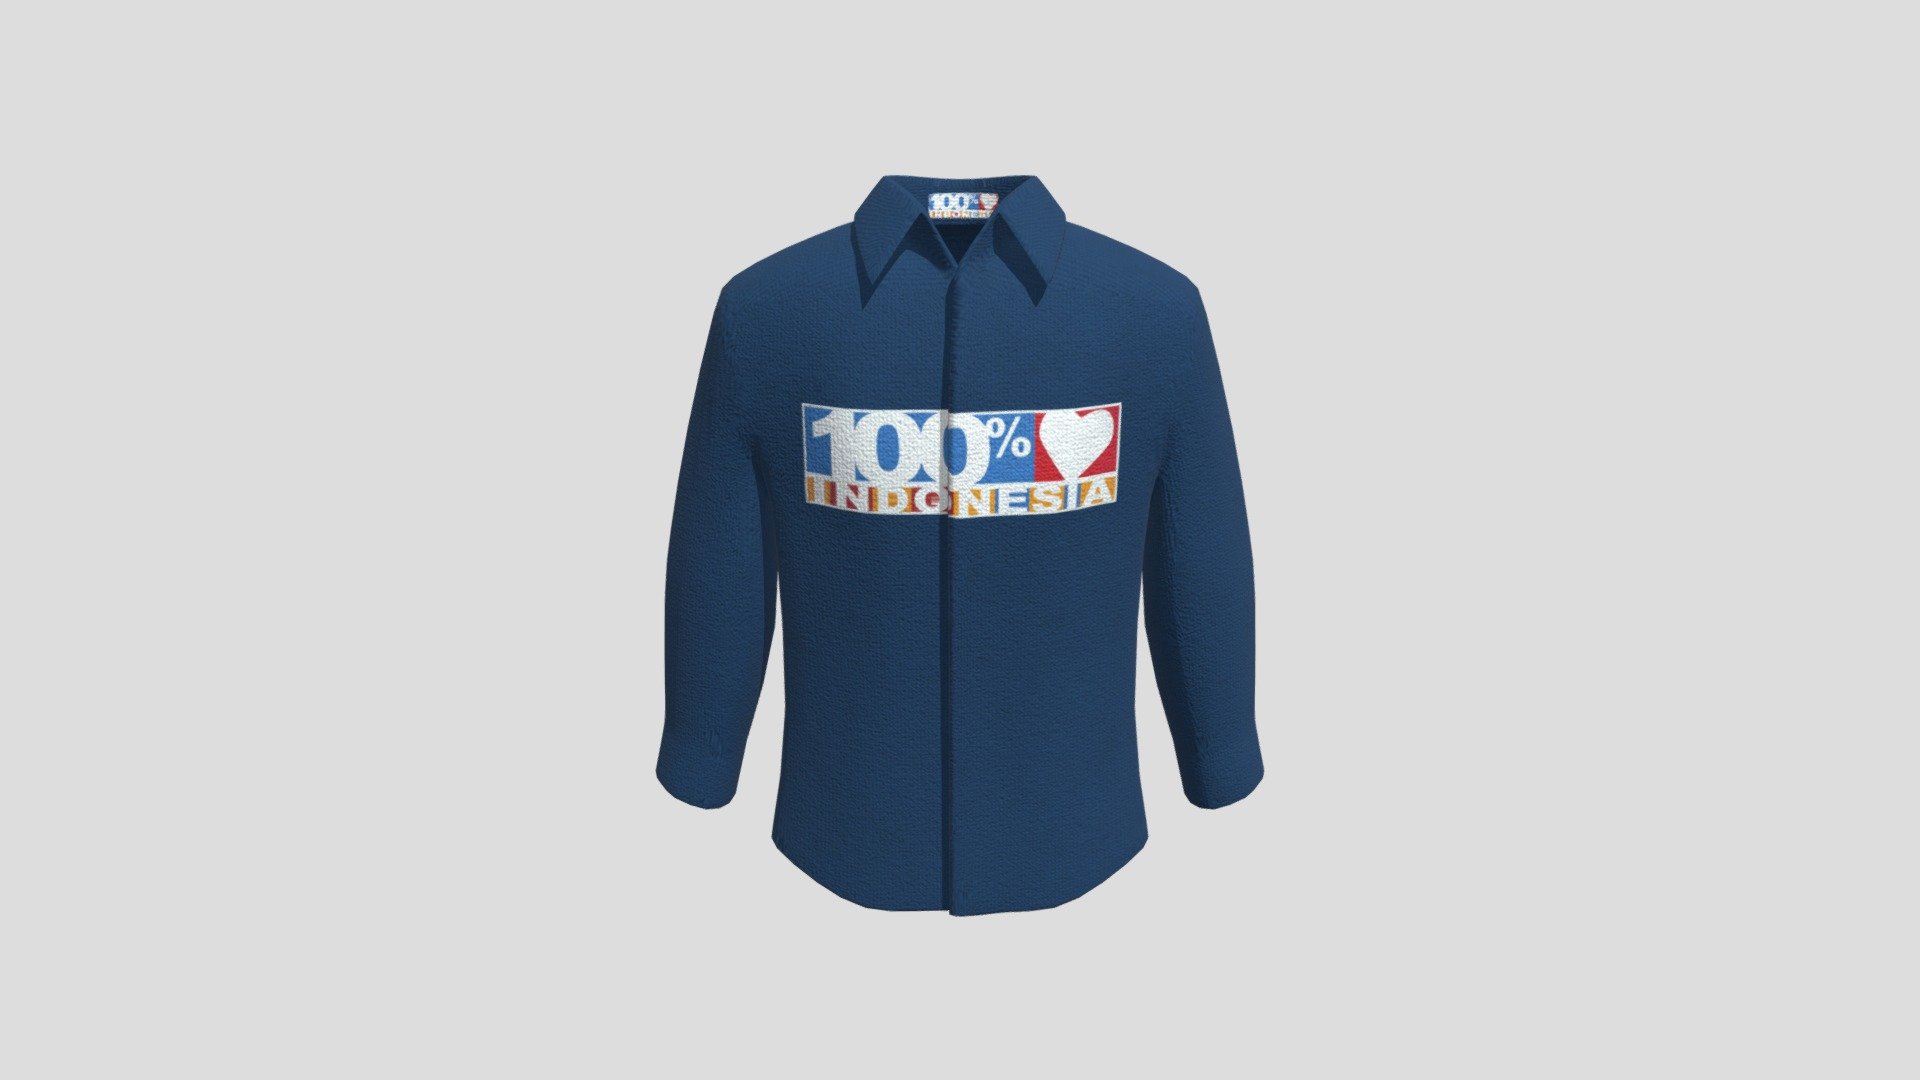 Created By Adi Nugraha
Jakarta Indonesia 30 may 2022 - Blue Shirt Long sleeve 100% Indonesia - Download Free 3D model by addie_ngr 3d model